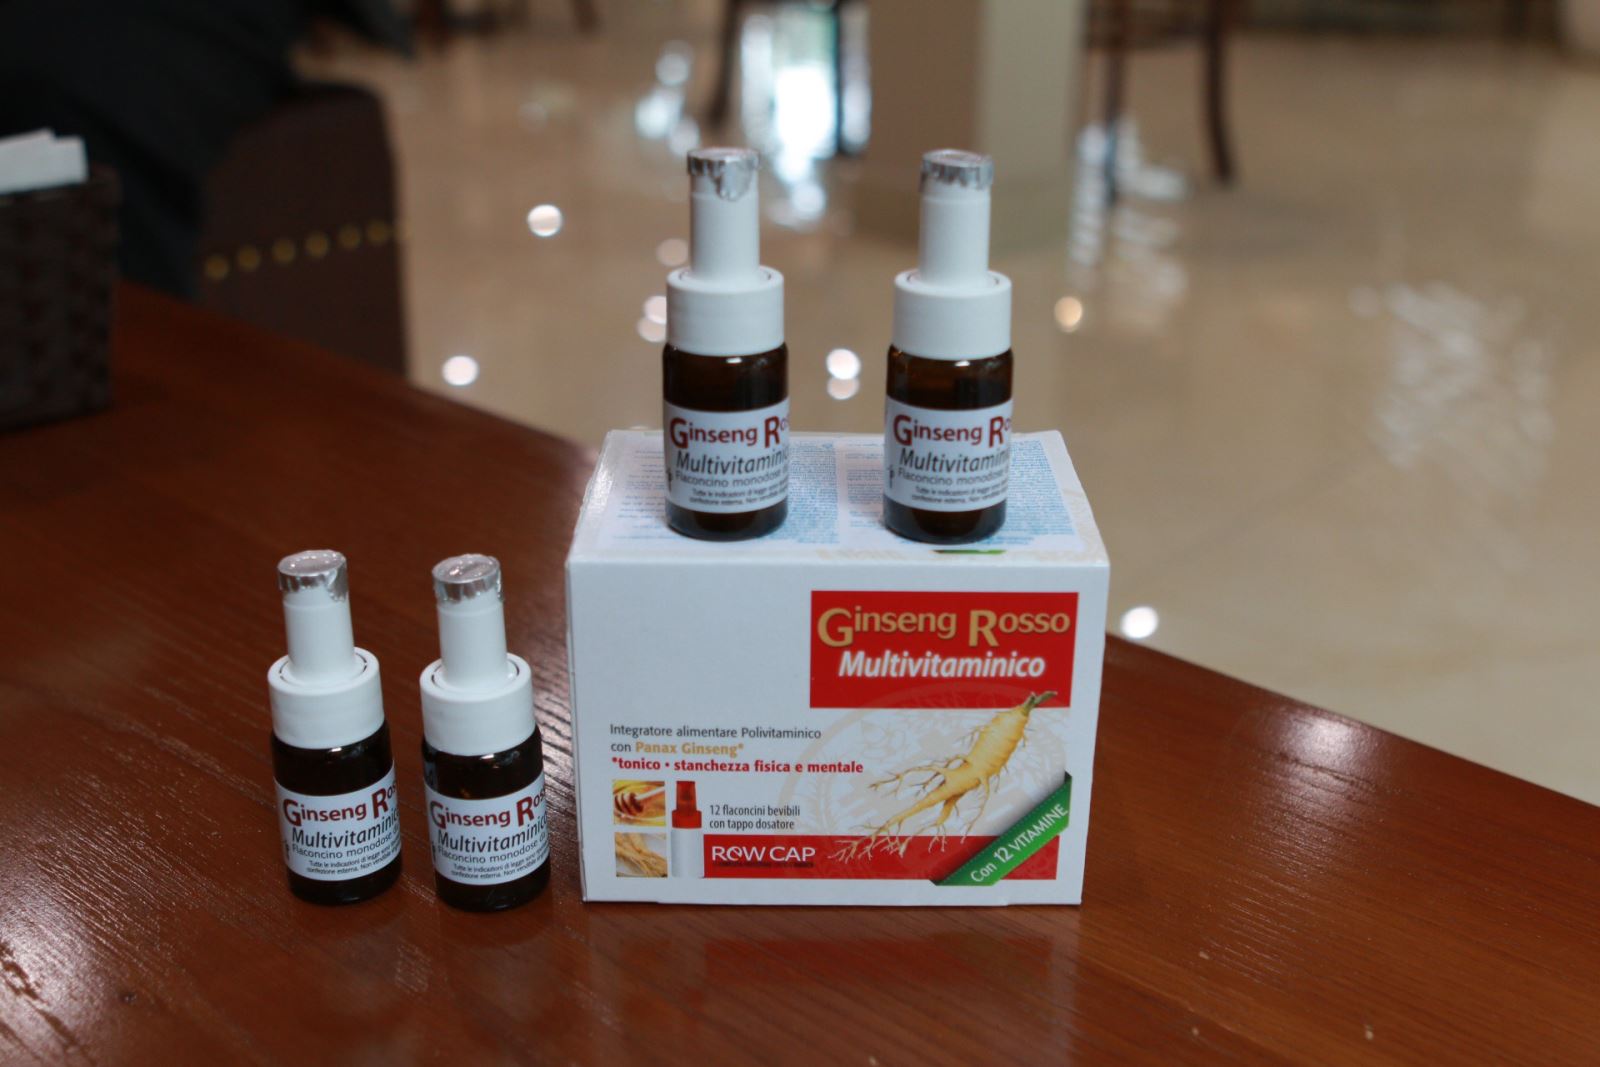 Thuốc Ginseng Rosso Multivitamin